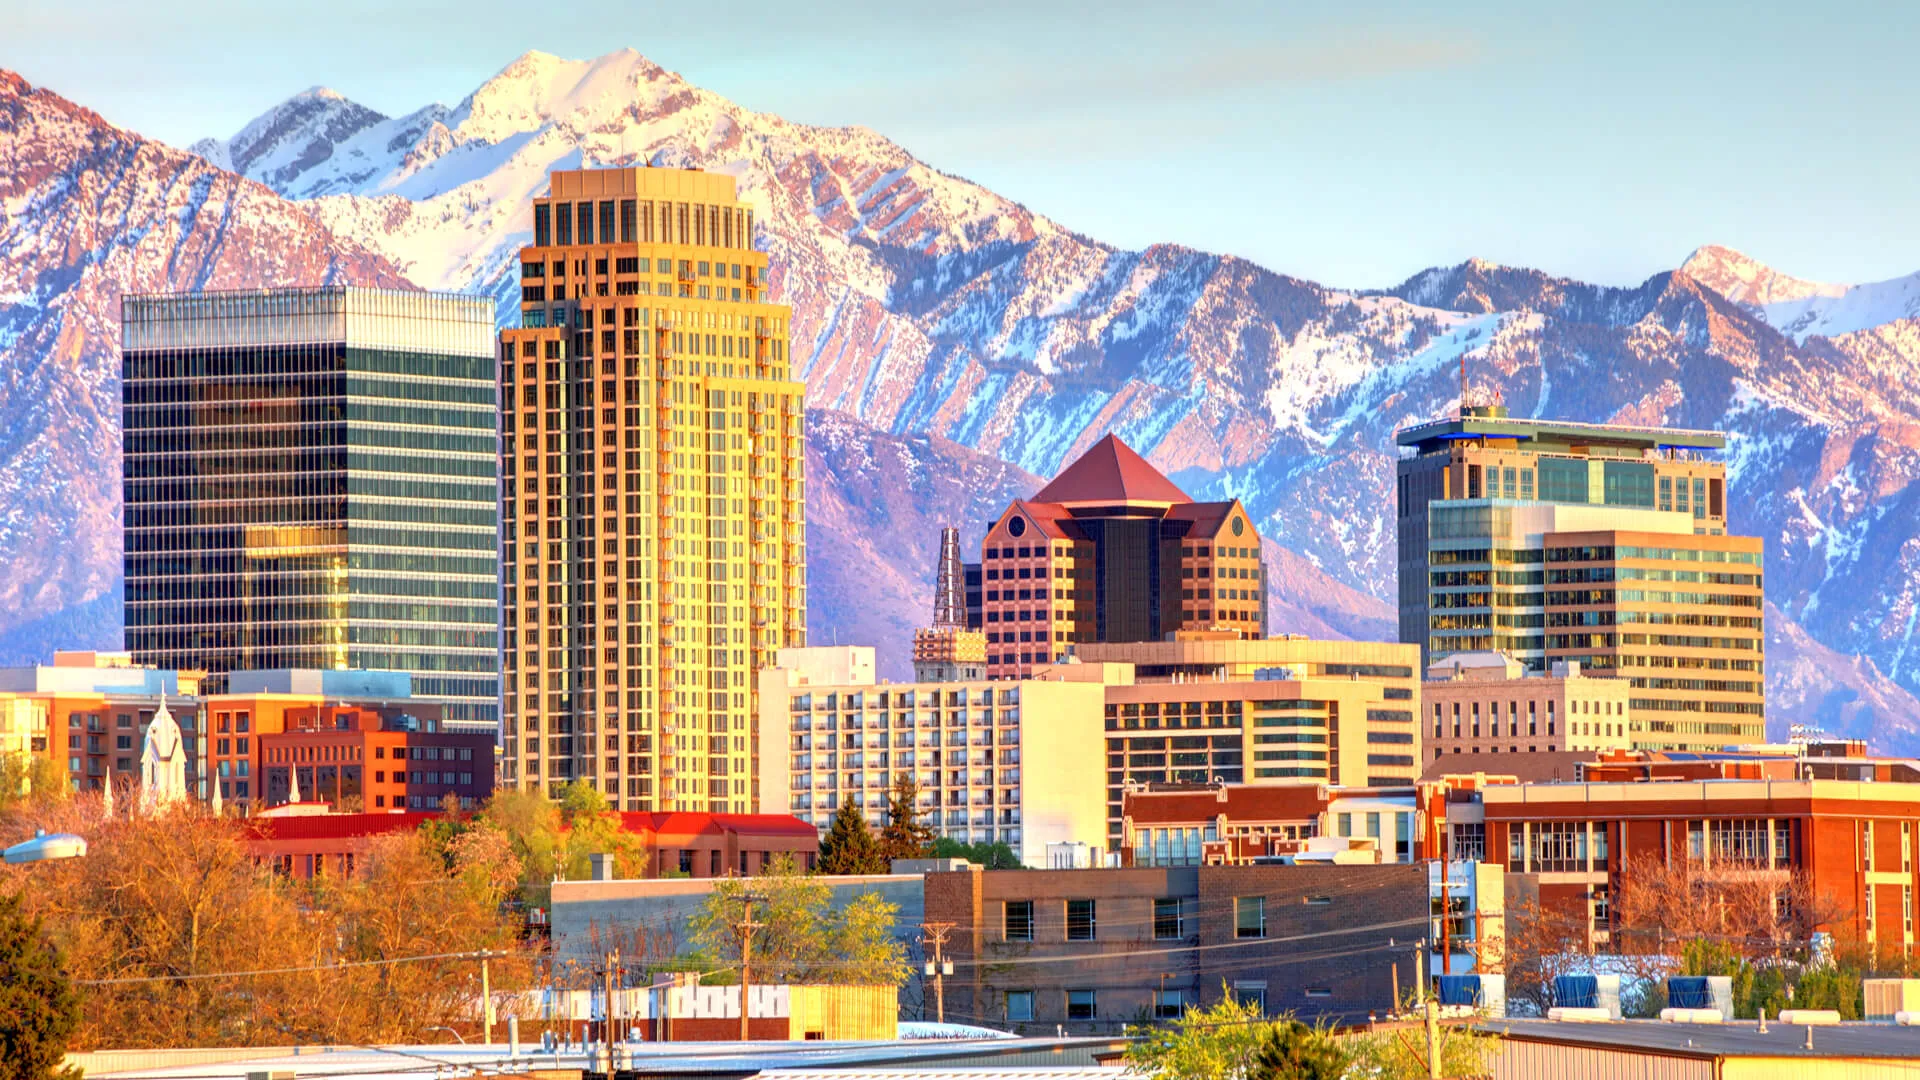 Salt Lake City is the capital and the most populous municipality of the U.